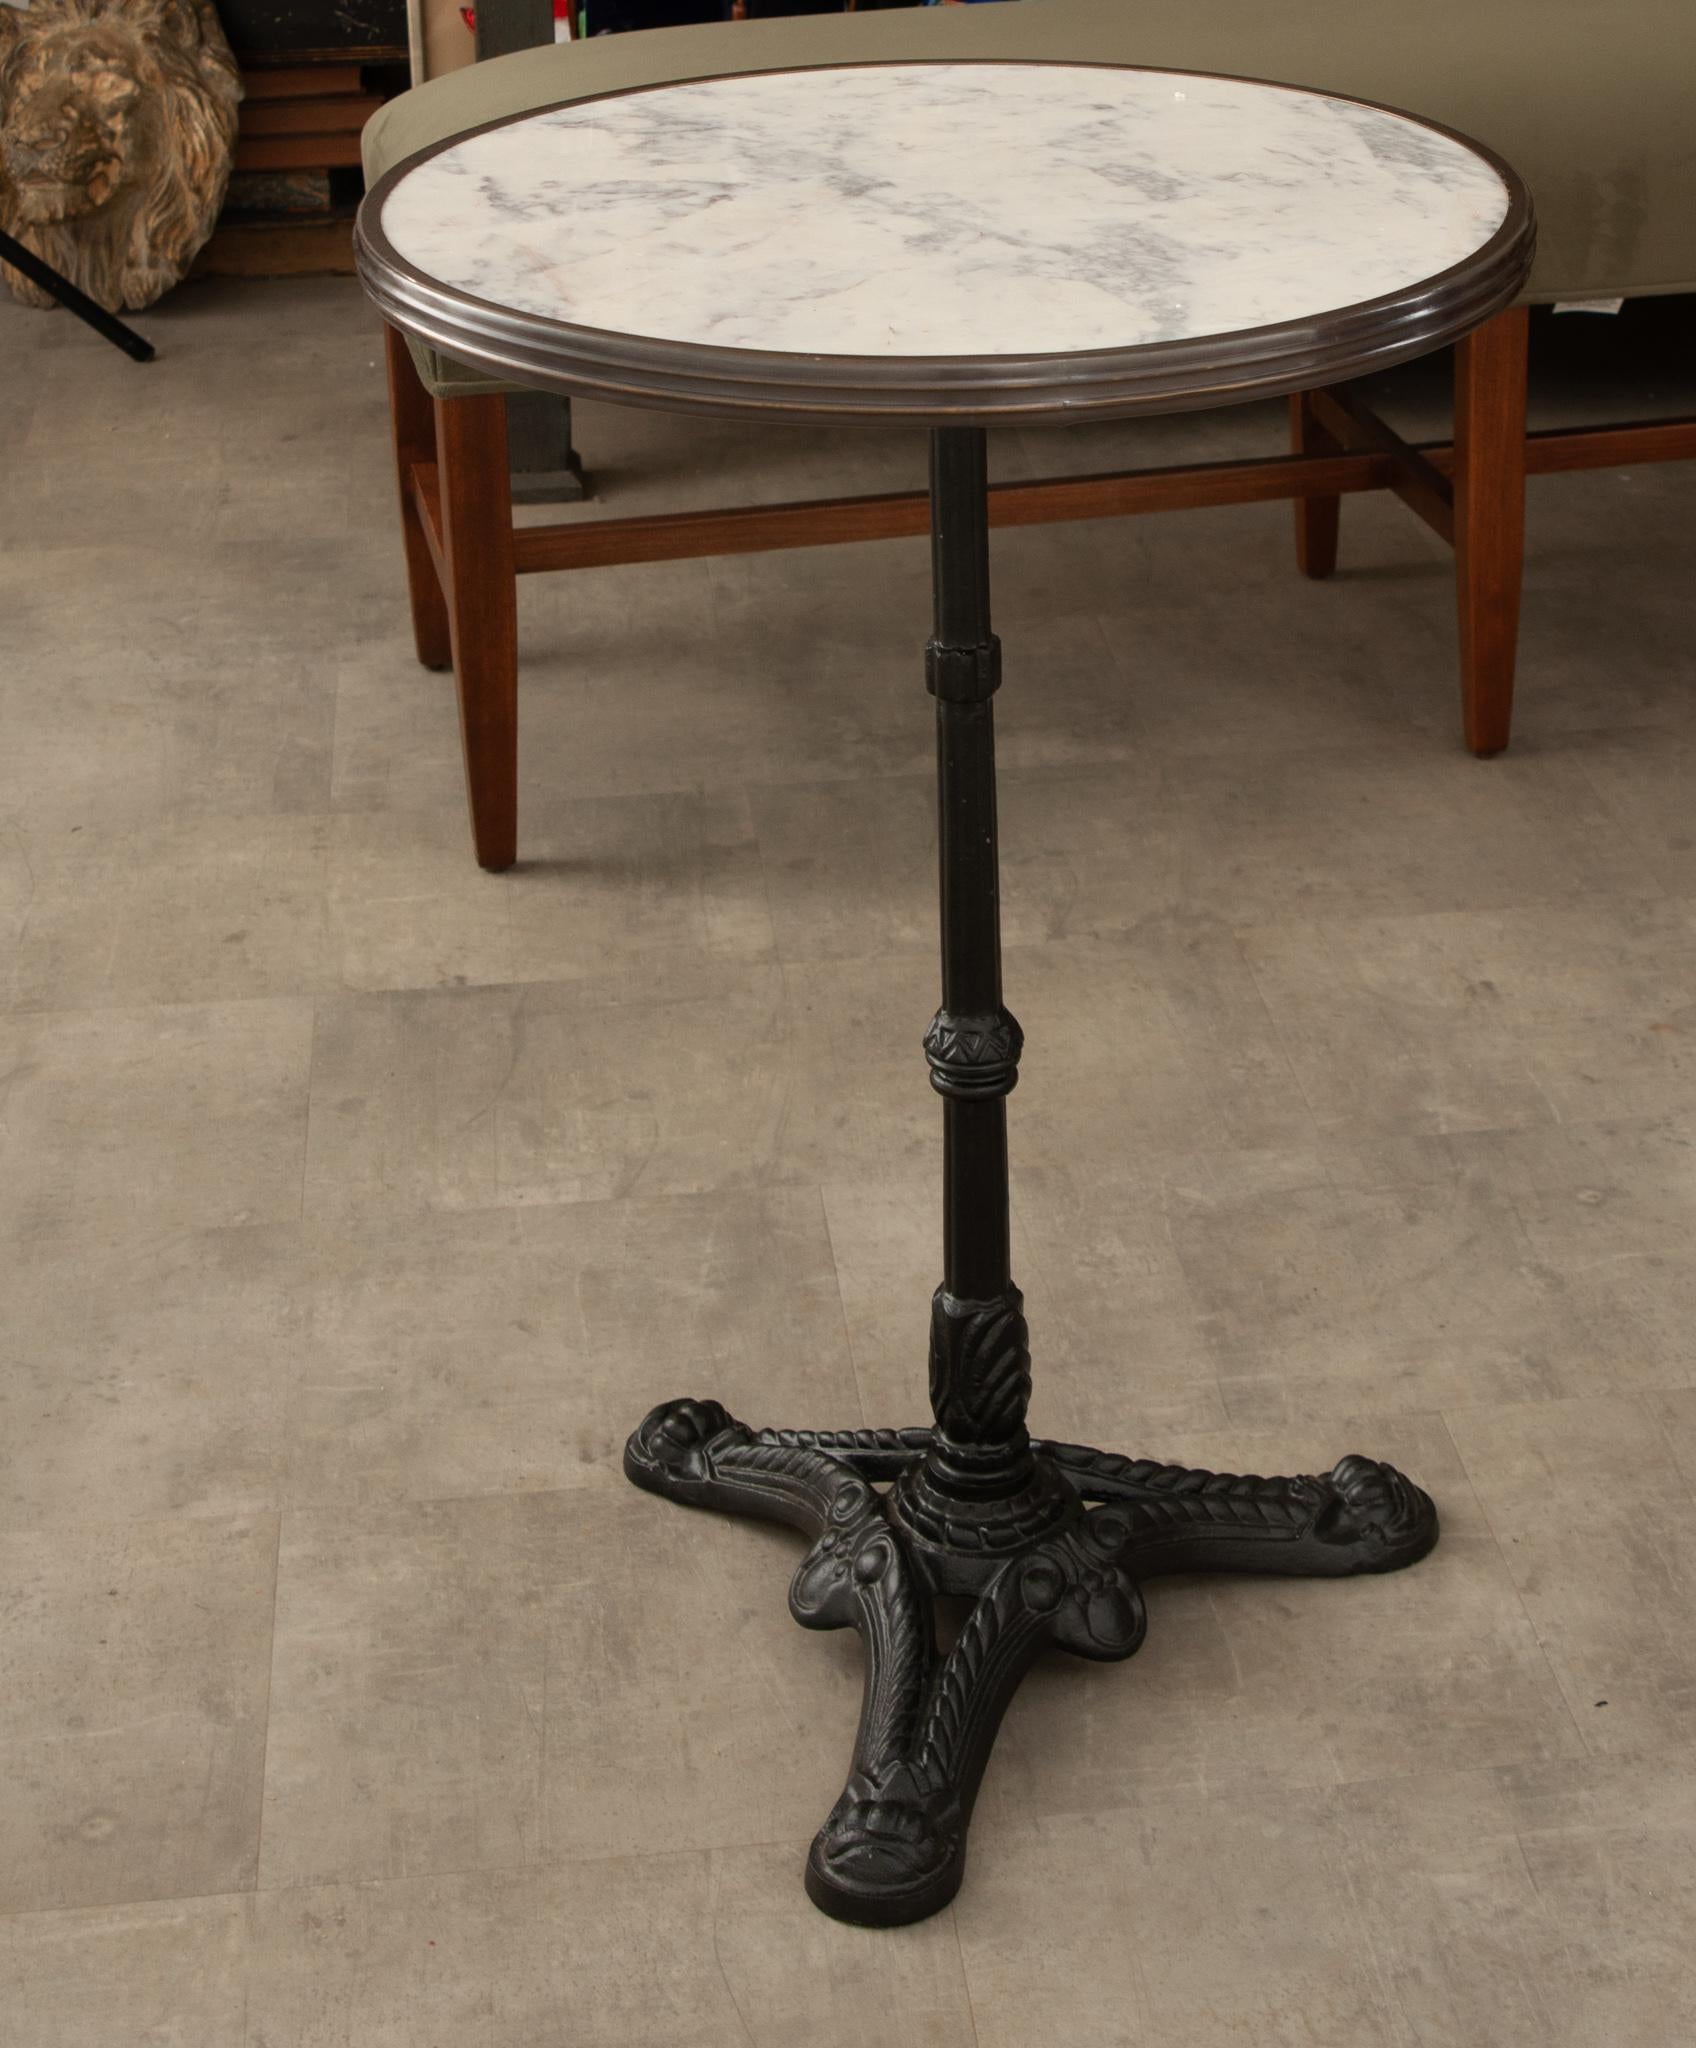 A classic Parisian style marble top & iron bistro table. A unique white marble top is banded by an antiqued brass trim. The base is a classic cast iron pedestal with three feet. This table can be disassembled for shipping or storage. If using this